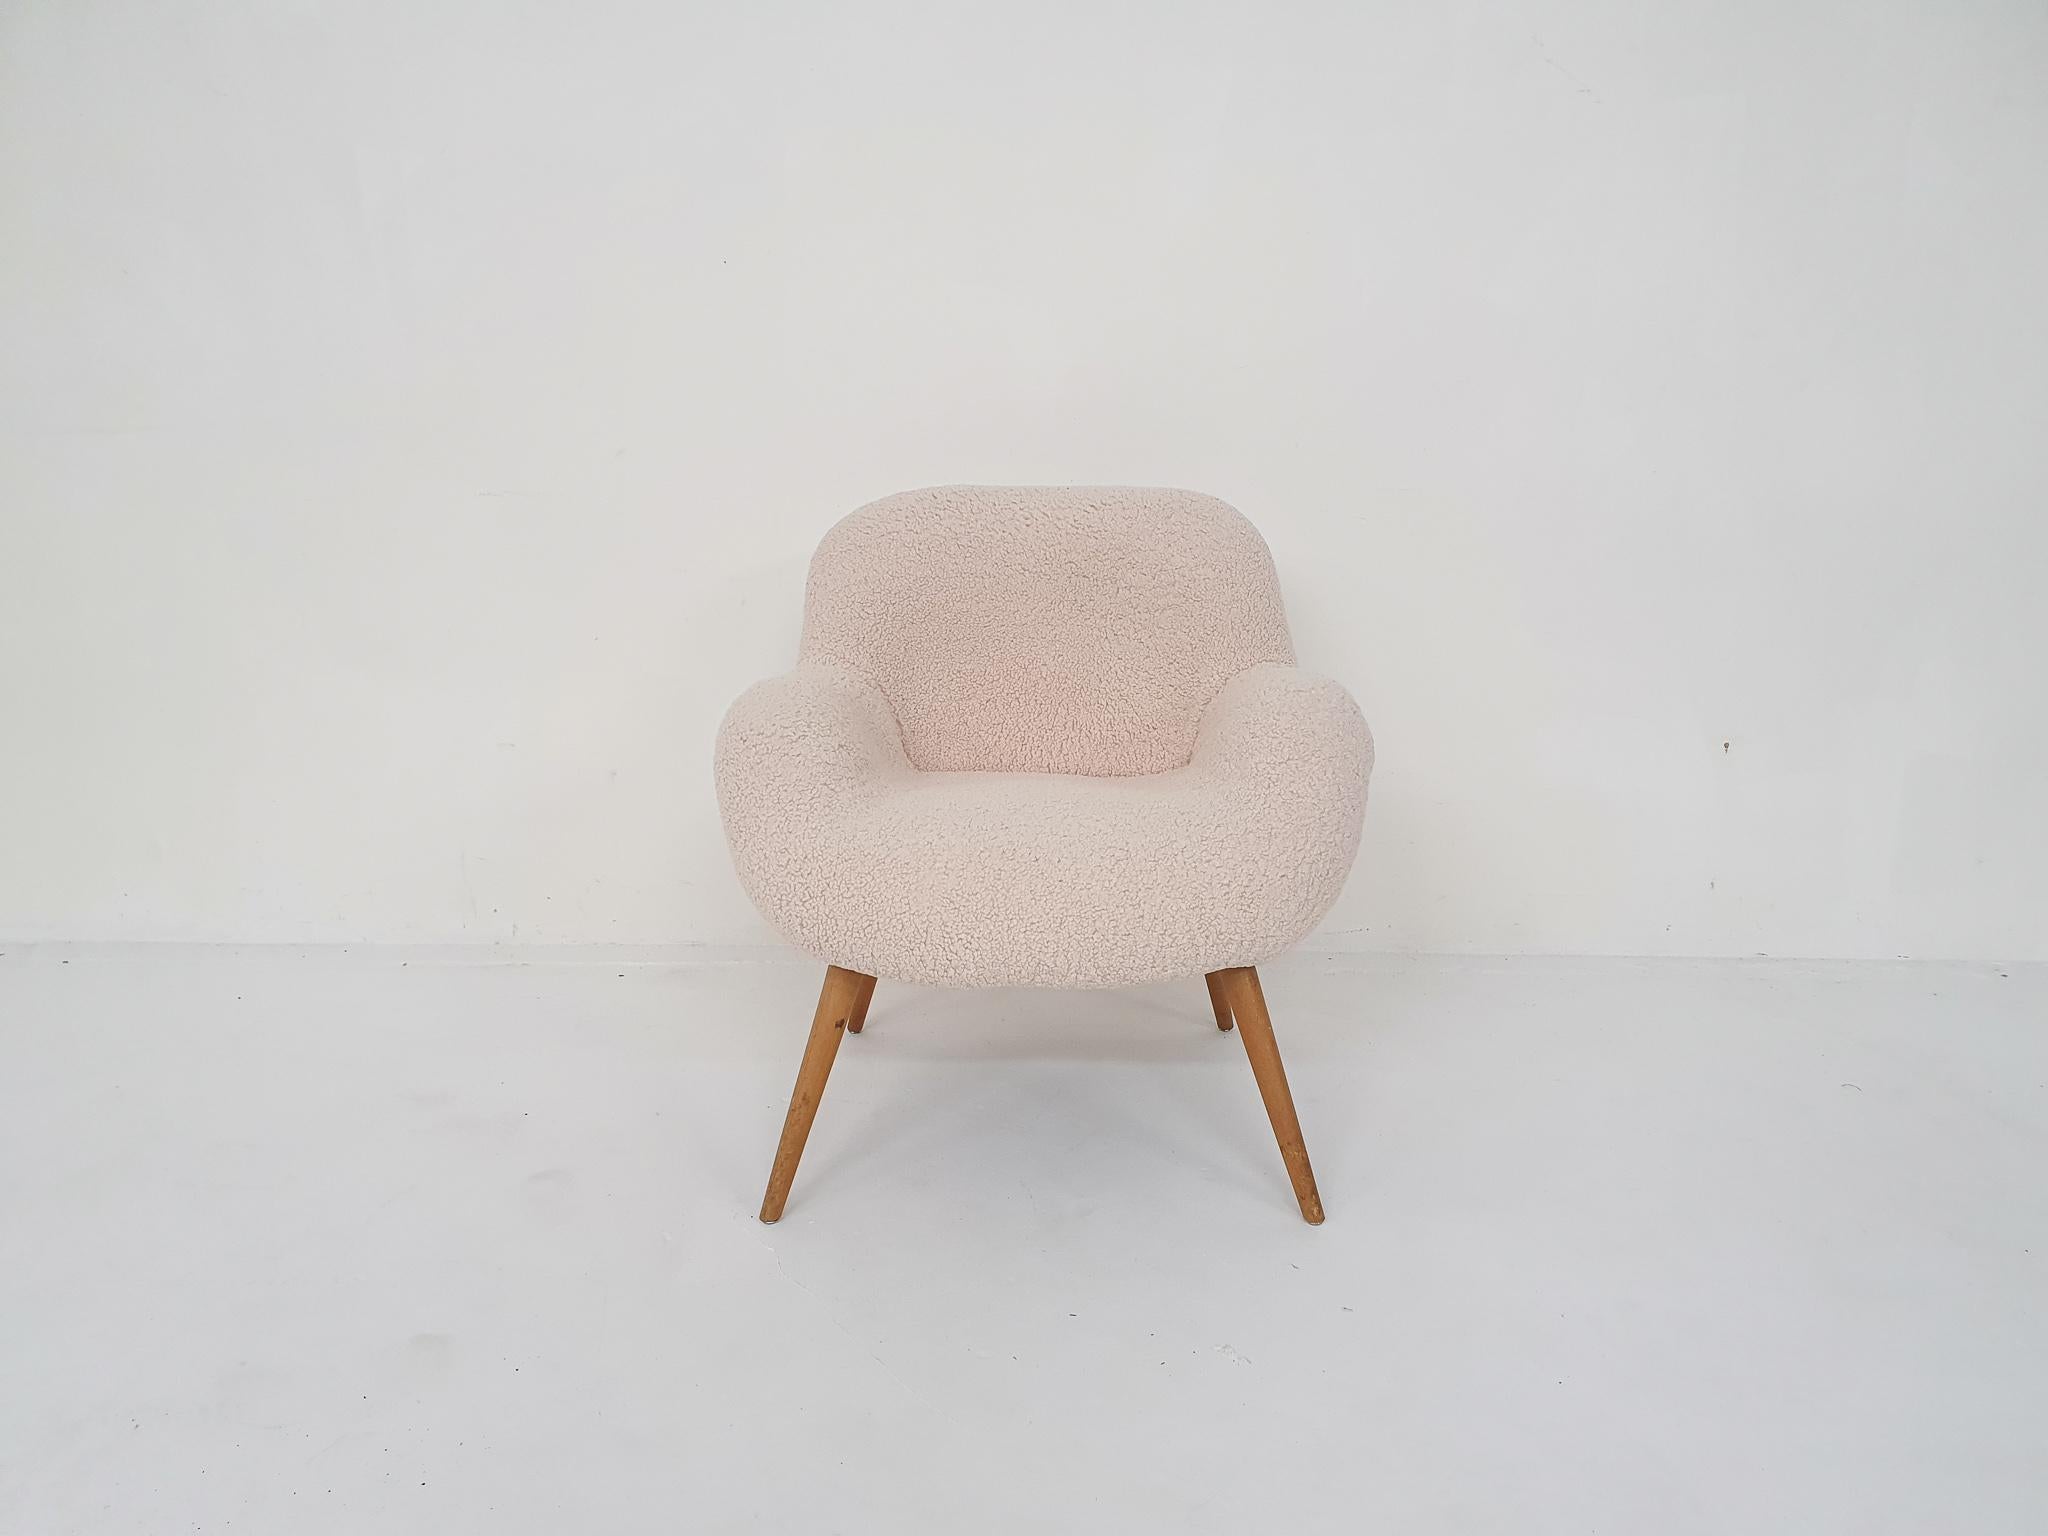 Scandinavian modern lounge chair, re-upholstered in beige boucle fabric and teak legs. In the style of Nanna Ditzel